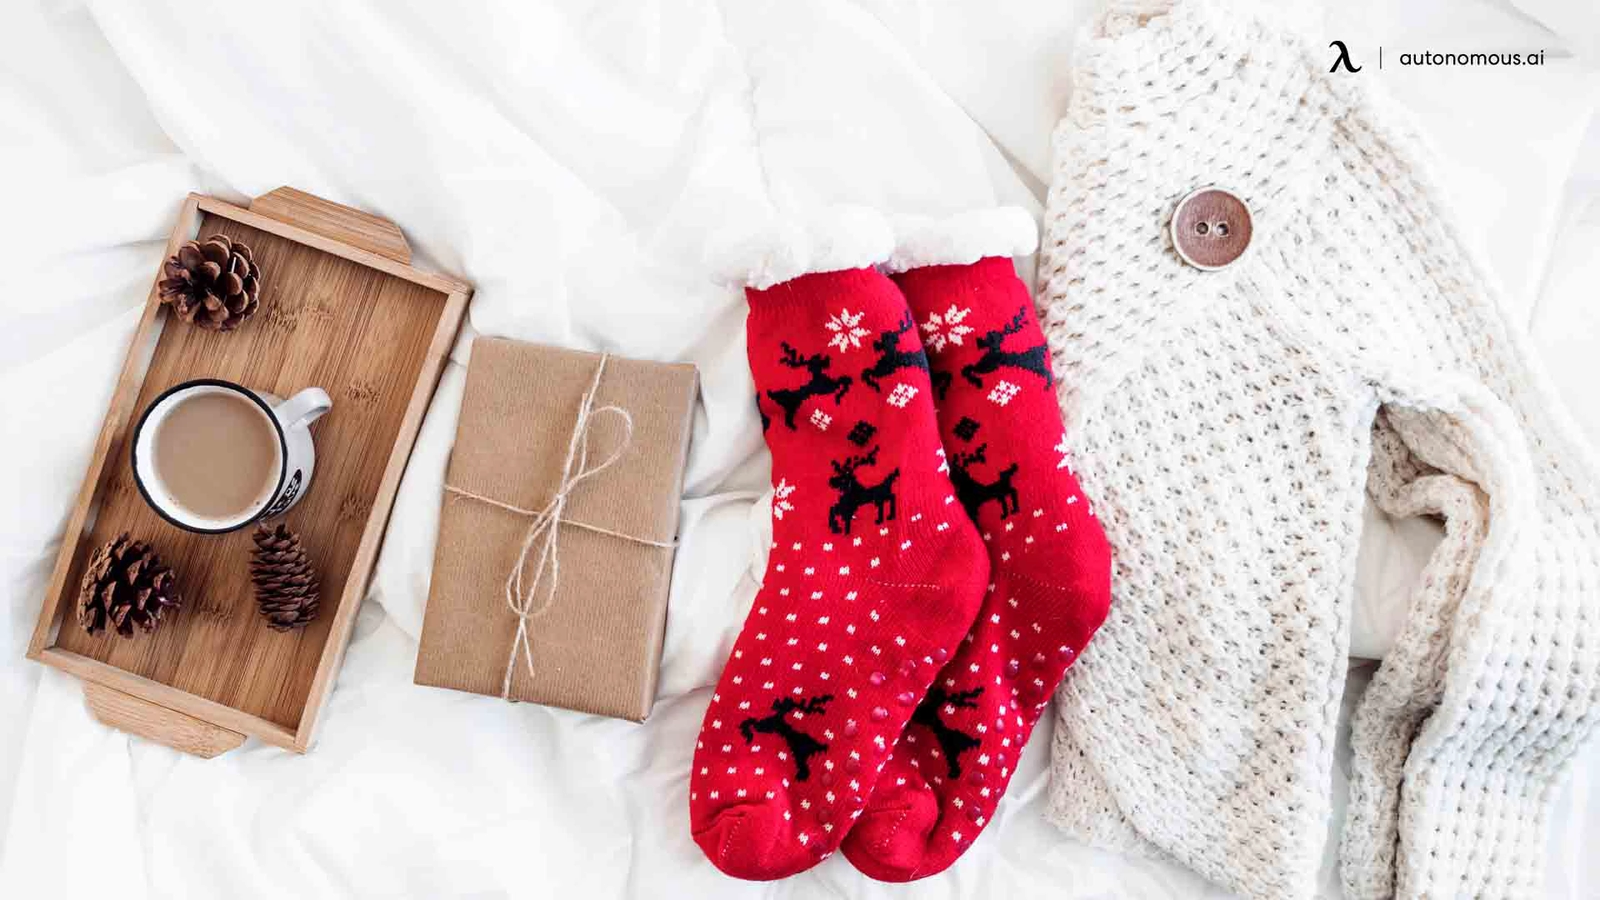 28 Best Christmas Gift Ideas for a College Student’s Productivity